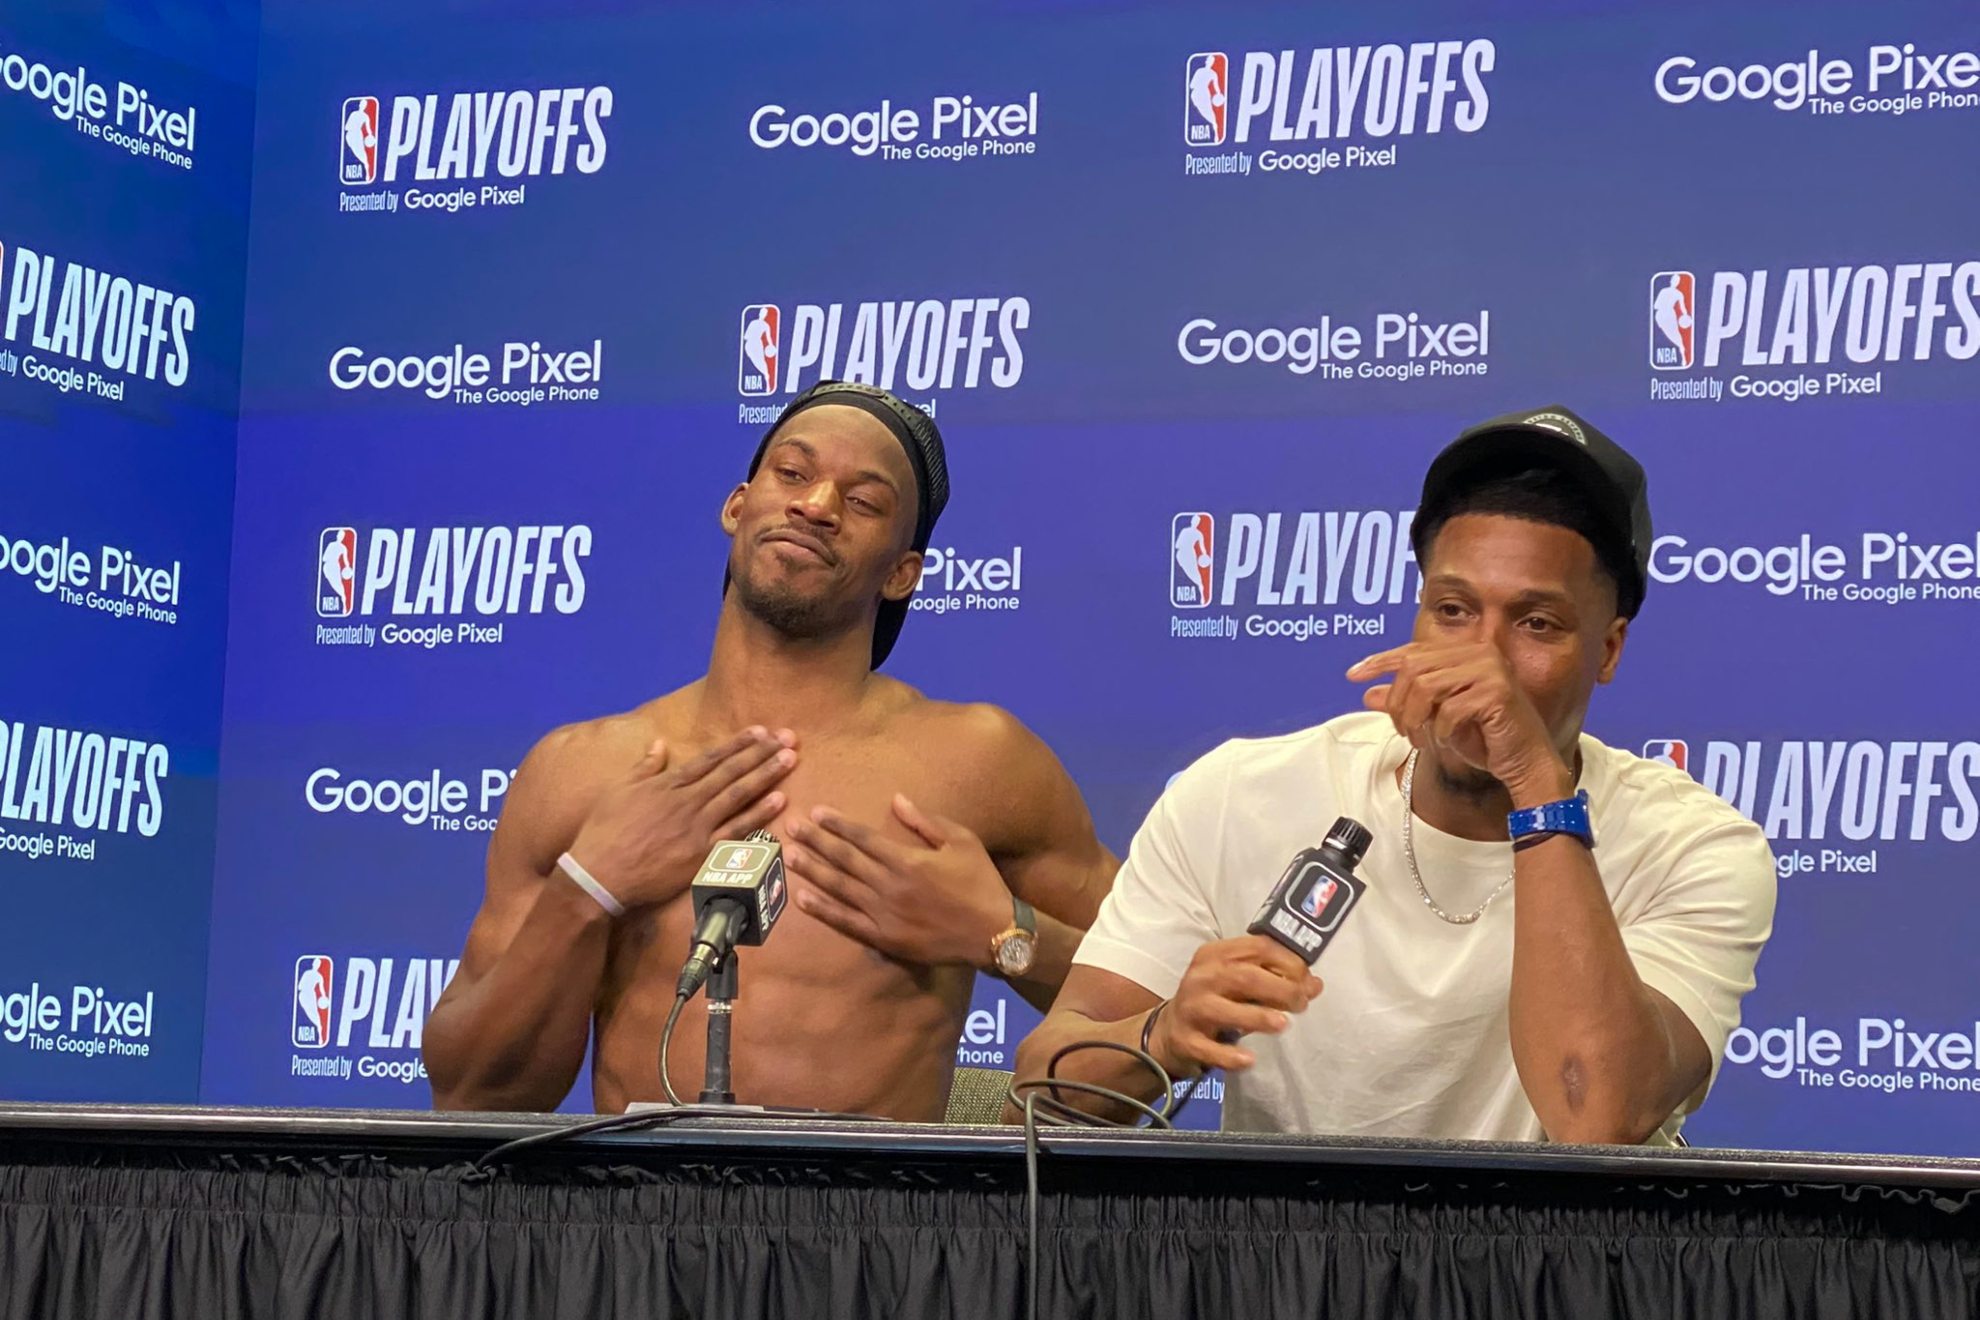 Jimmy Butler shows up at the press conference shirtless and Kyle Lowry trolls him: I don't want to embarrass him